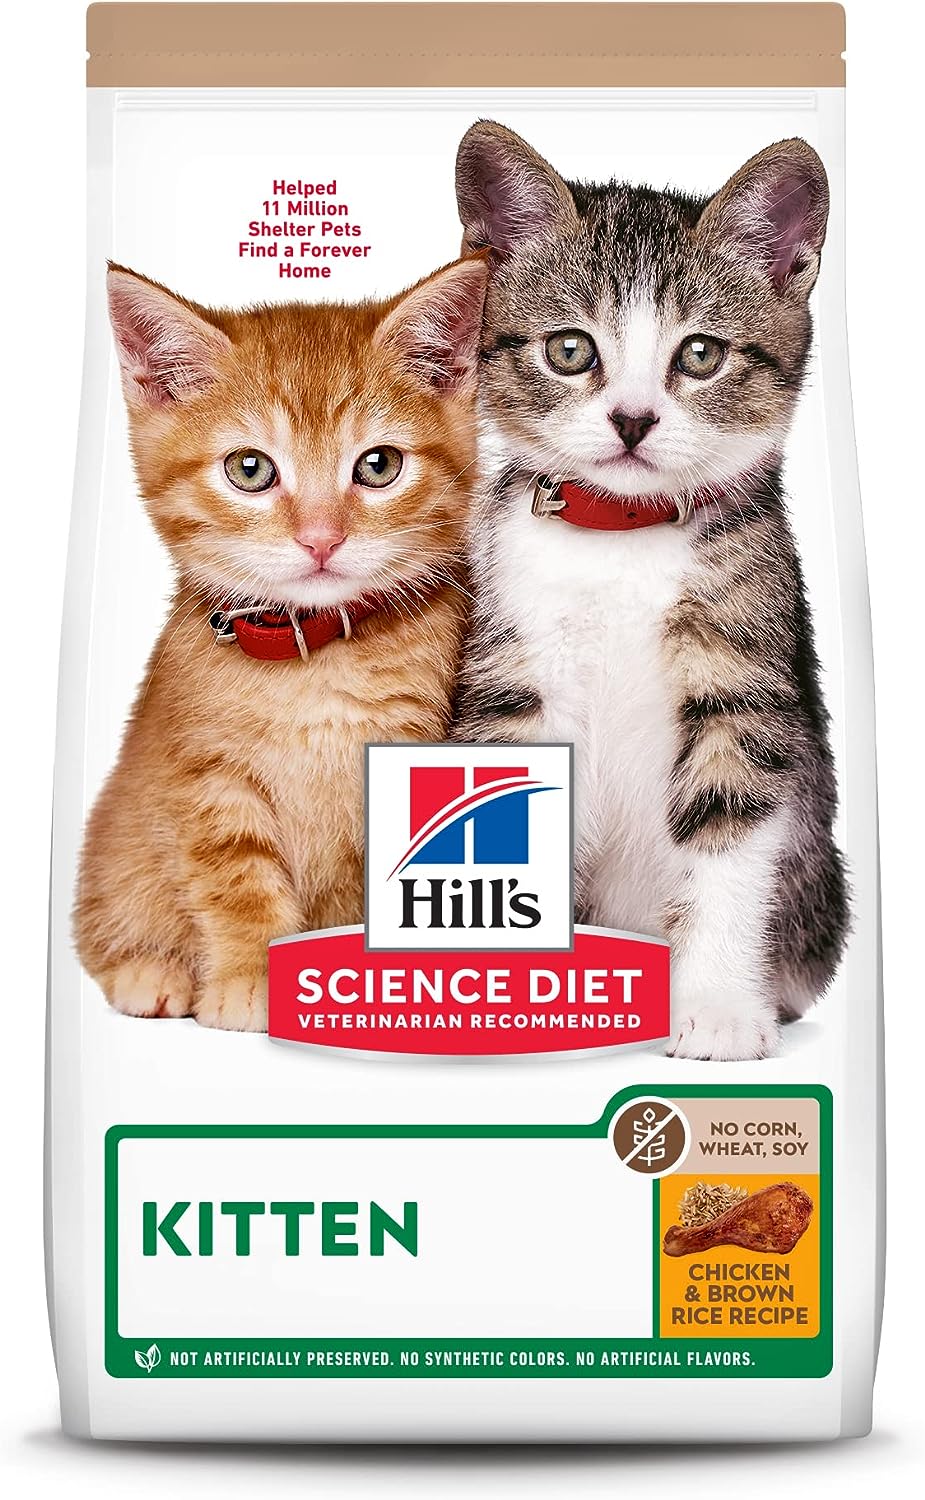 SCIENCE D KIT NO CORN WH SOY